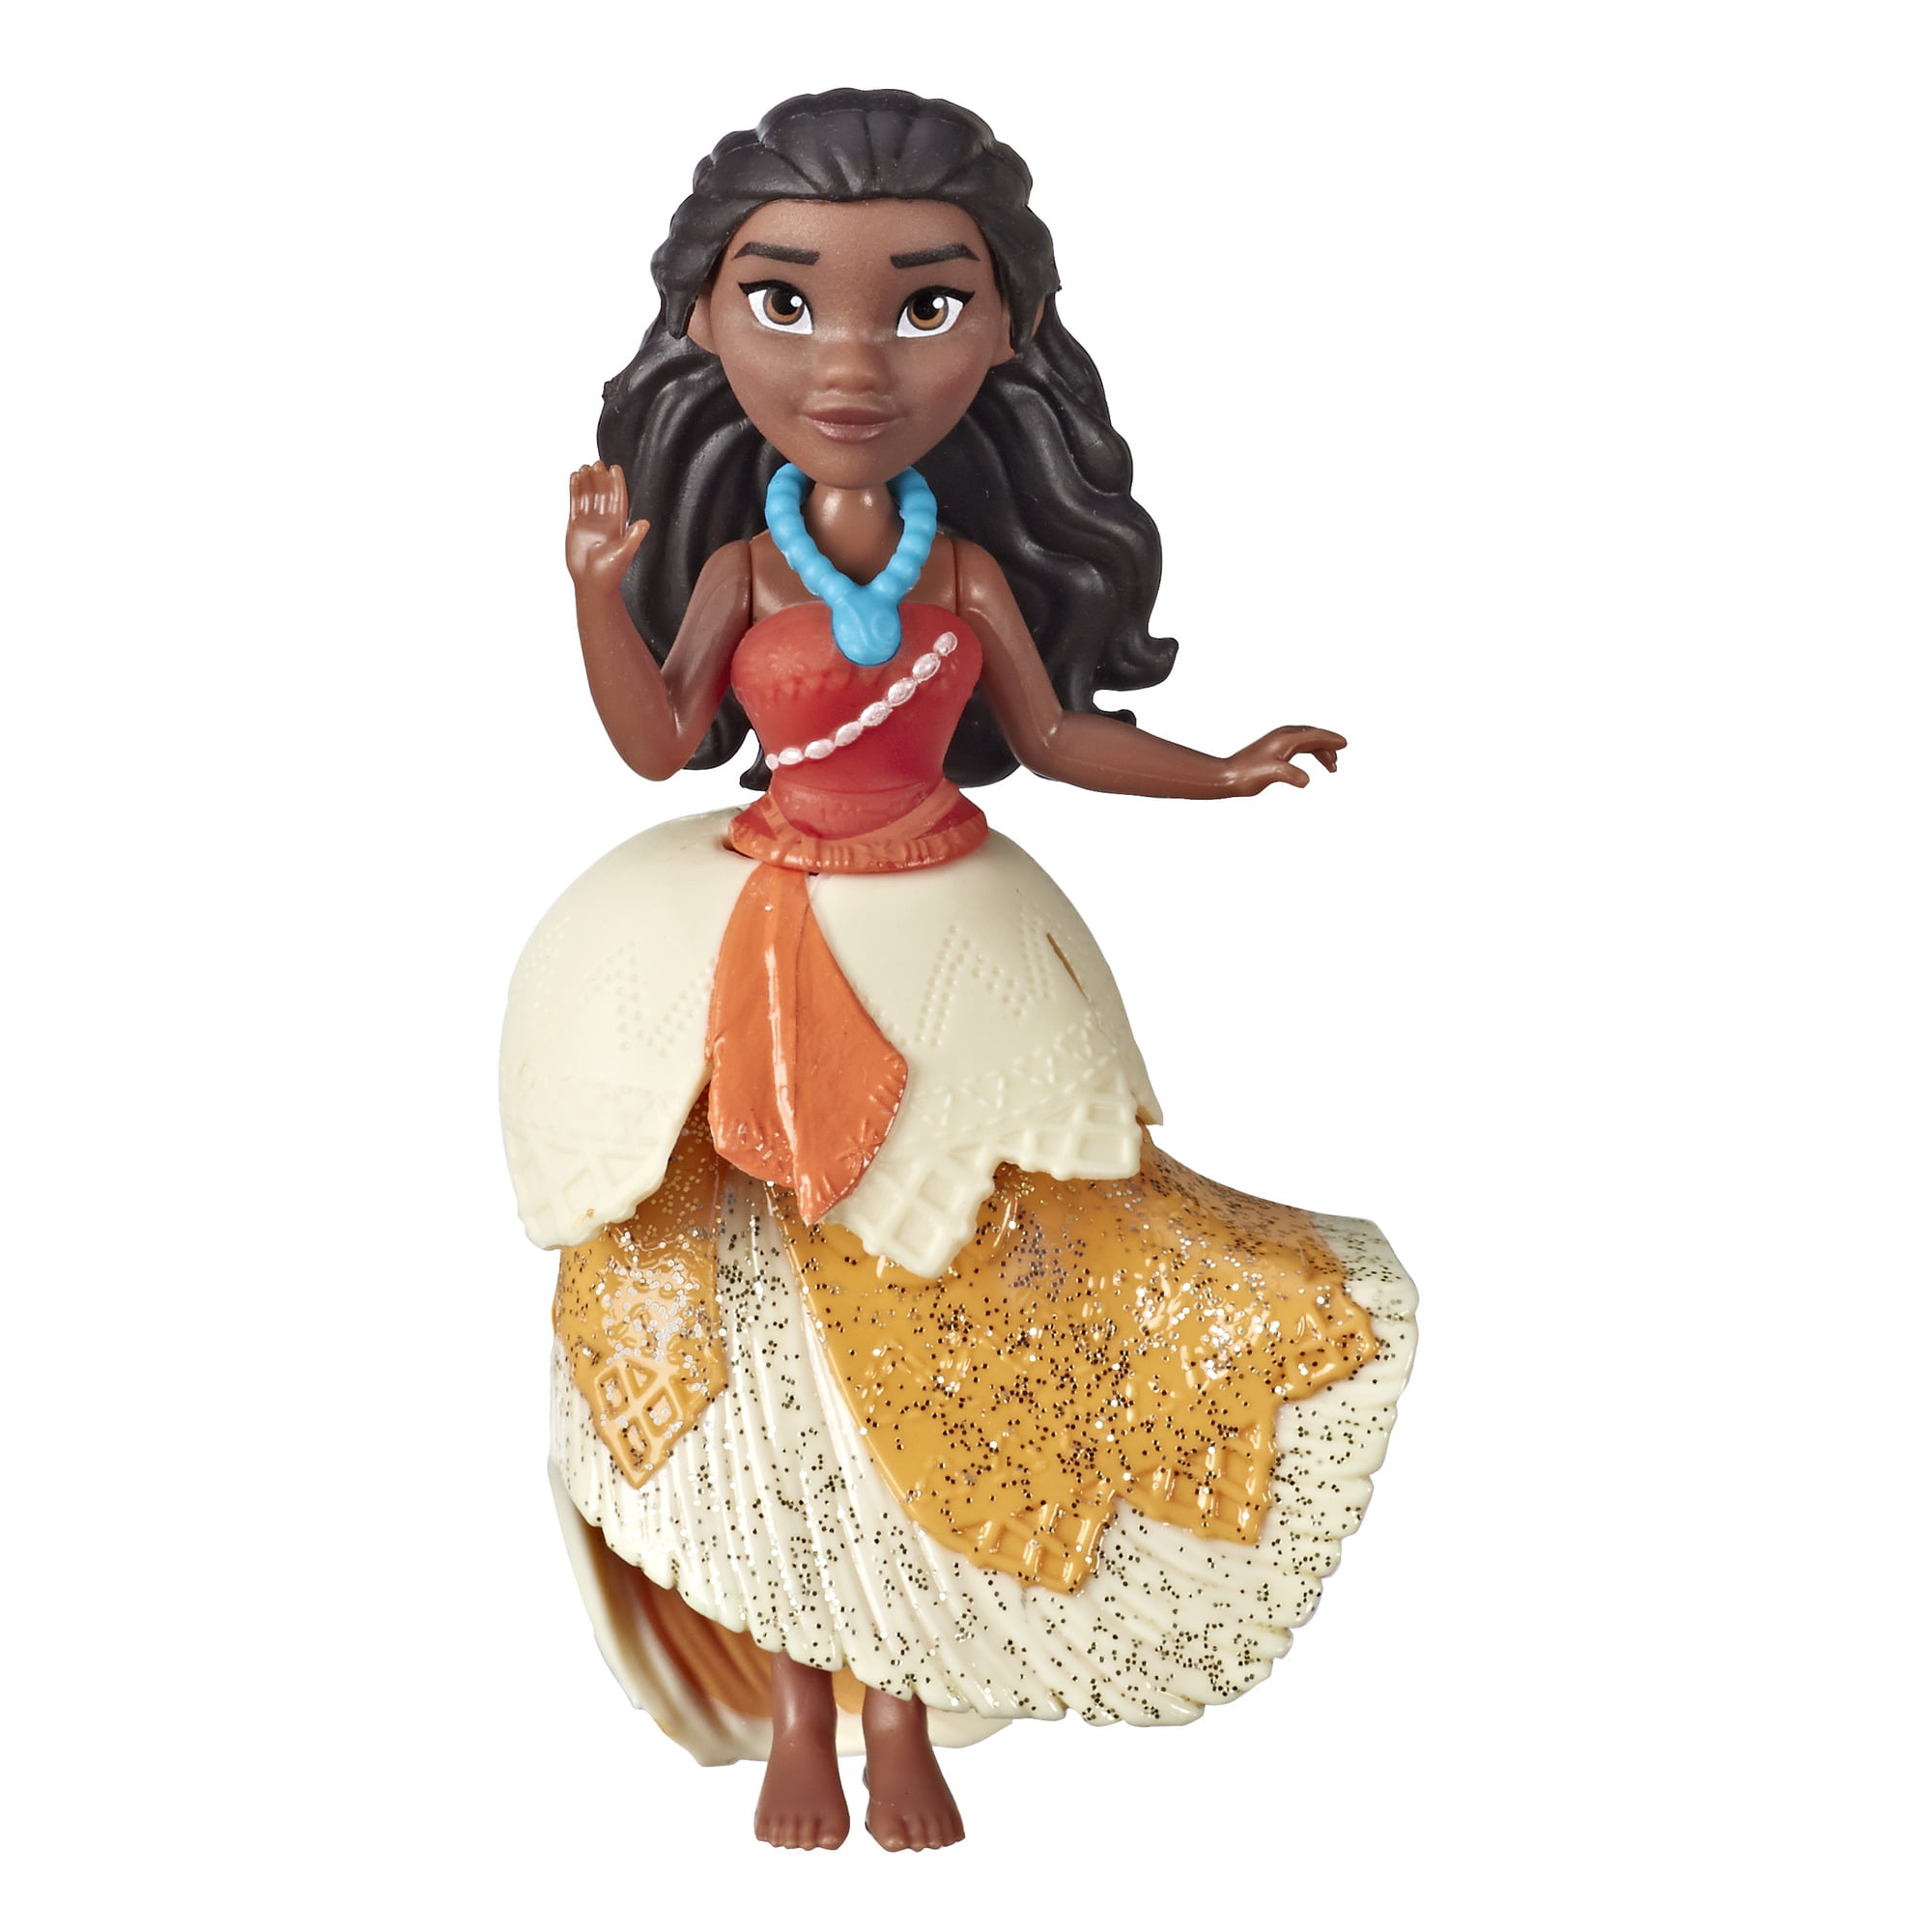 Disney Princess Moana Collectible Doll with Glittery One